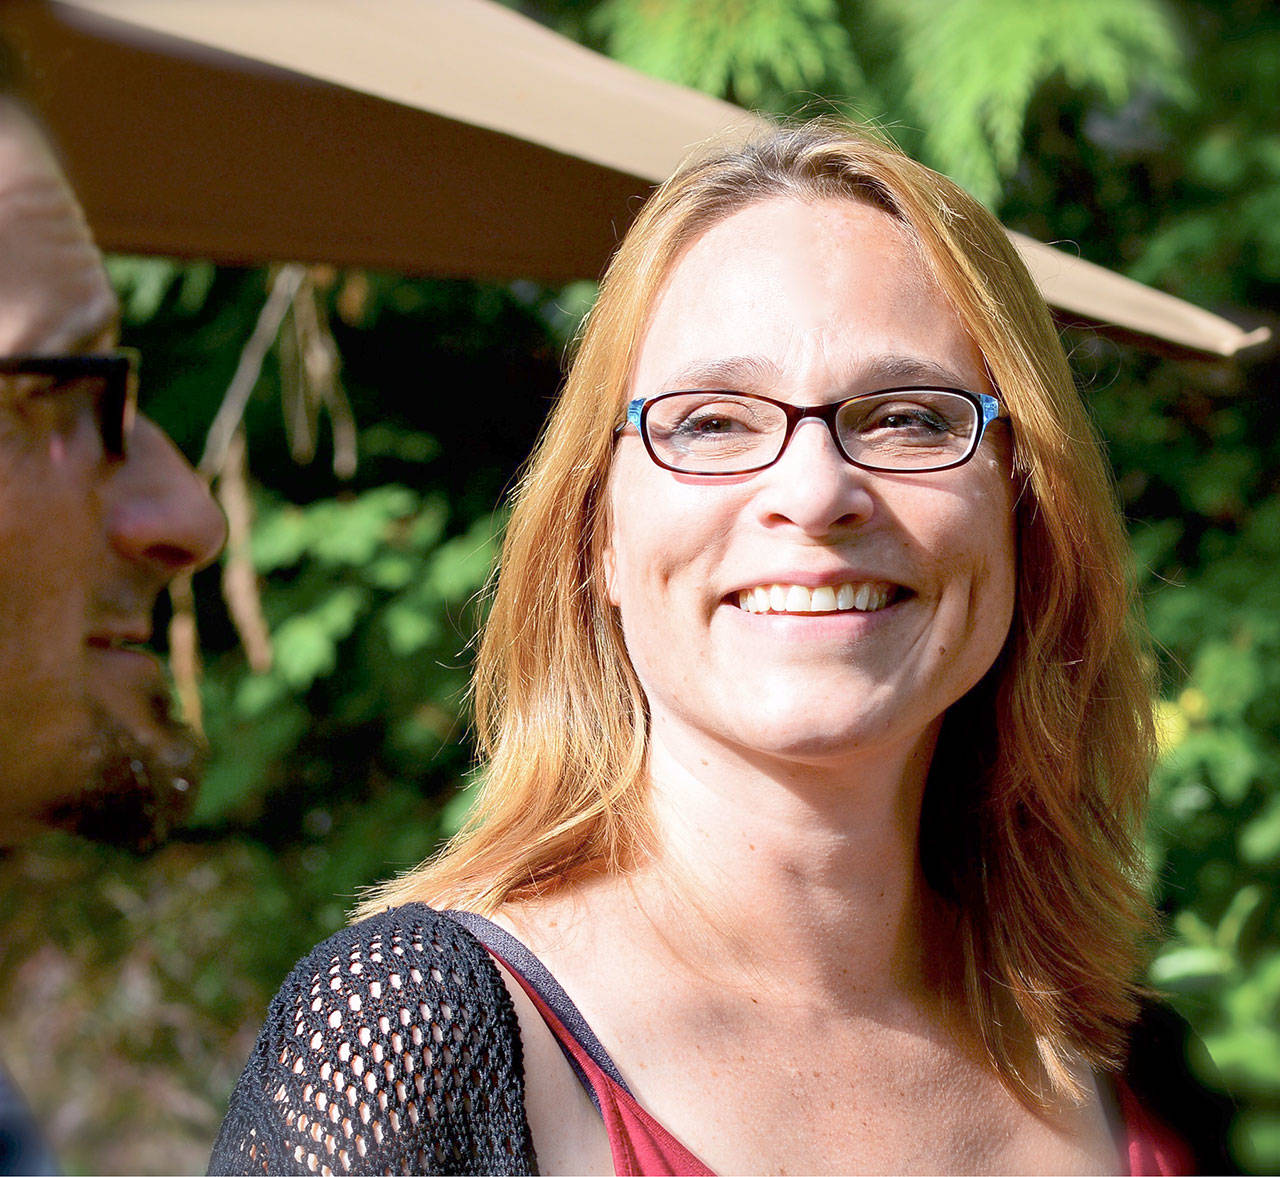 Anna Andersen is artistic director of Port Angeles’ Shakespeare in the Woods festival. (Diane Urbani de la Paz/for Peninsula Daily News)